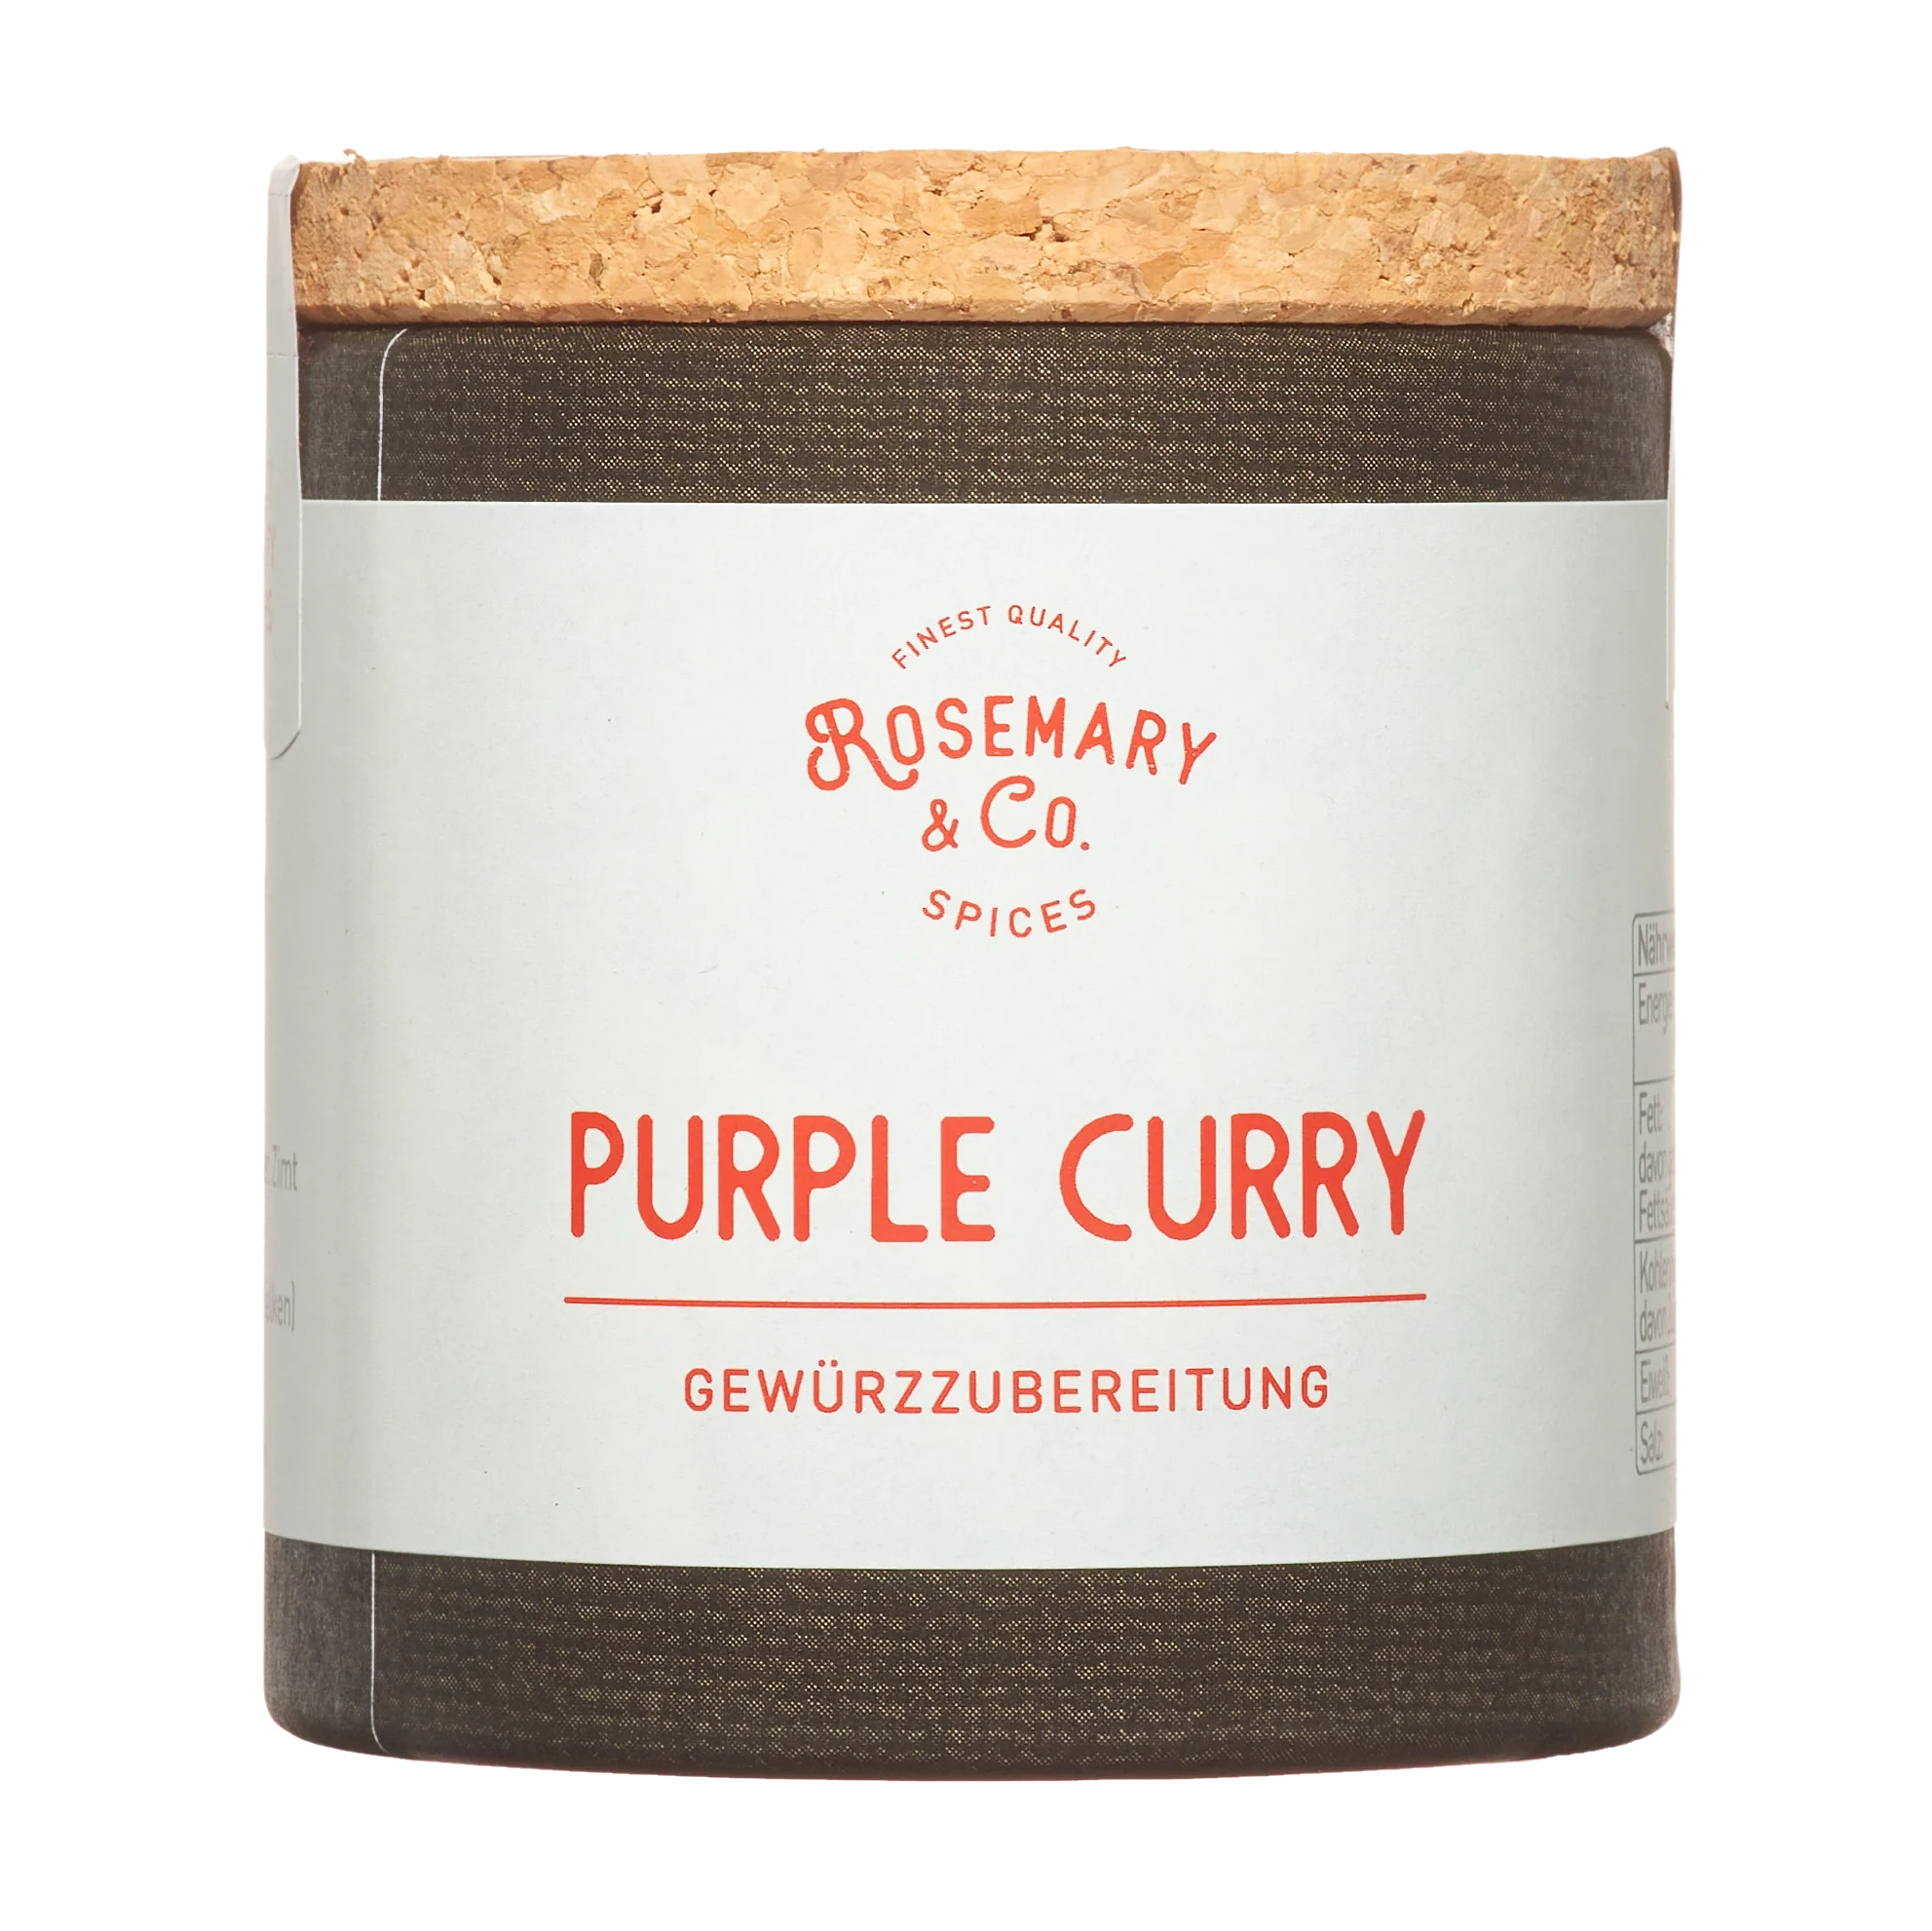 Rosemary Co Purple Curry Gewuerzzubereitung Korkdose 43g 1